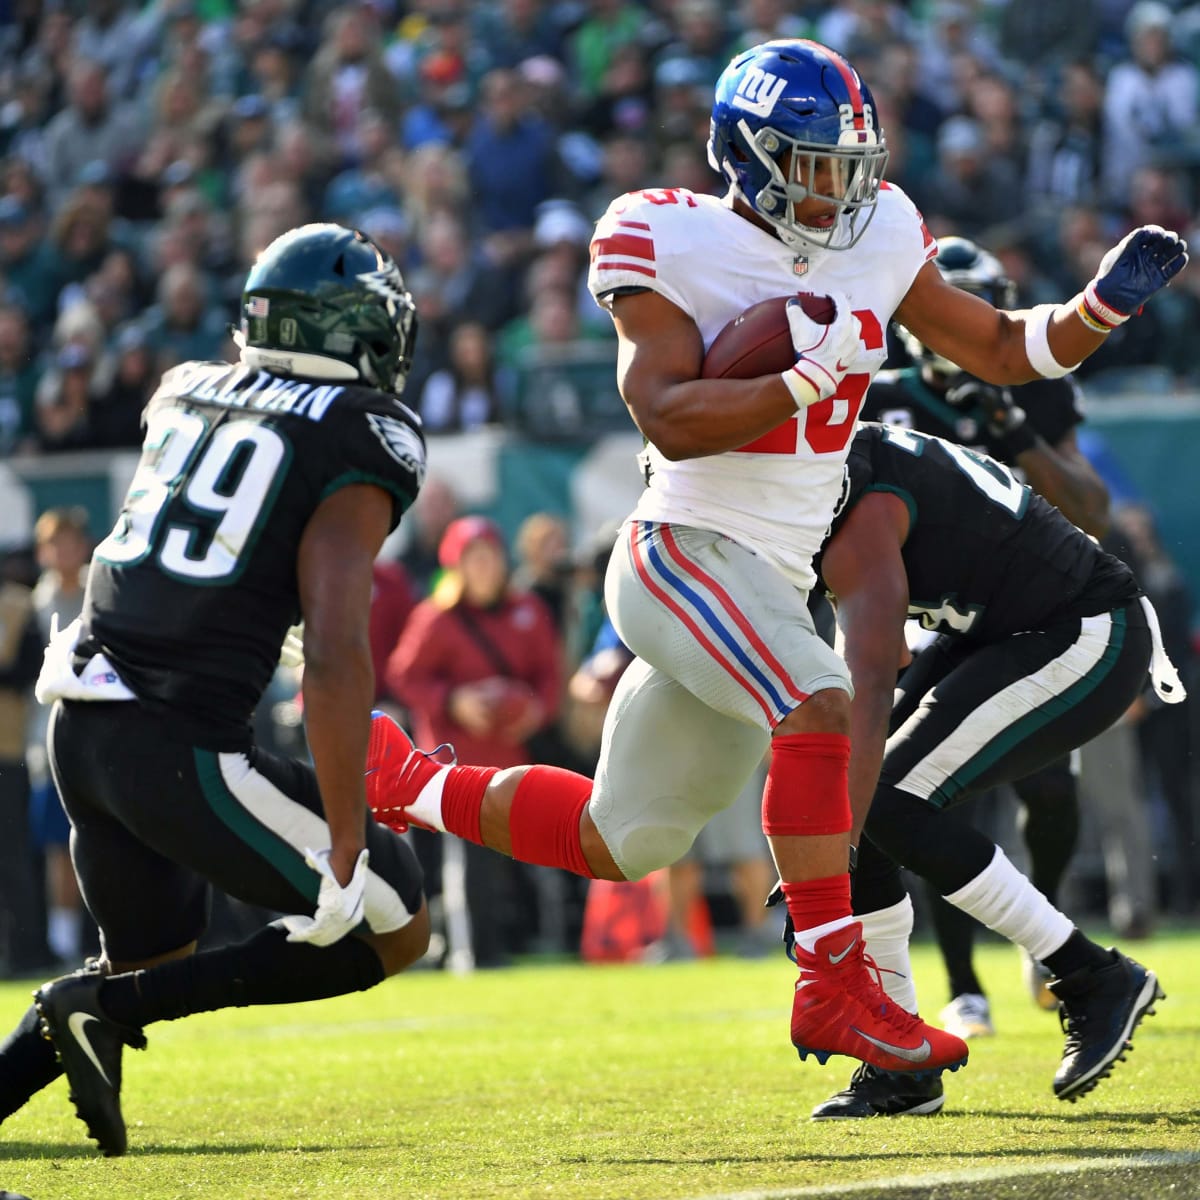 Why the time for Eagles-Giants game changed